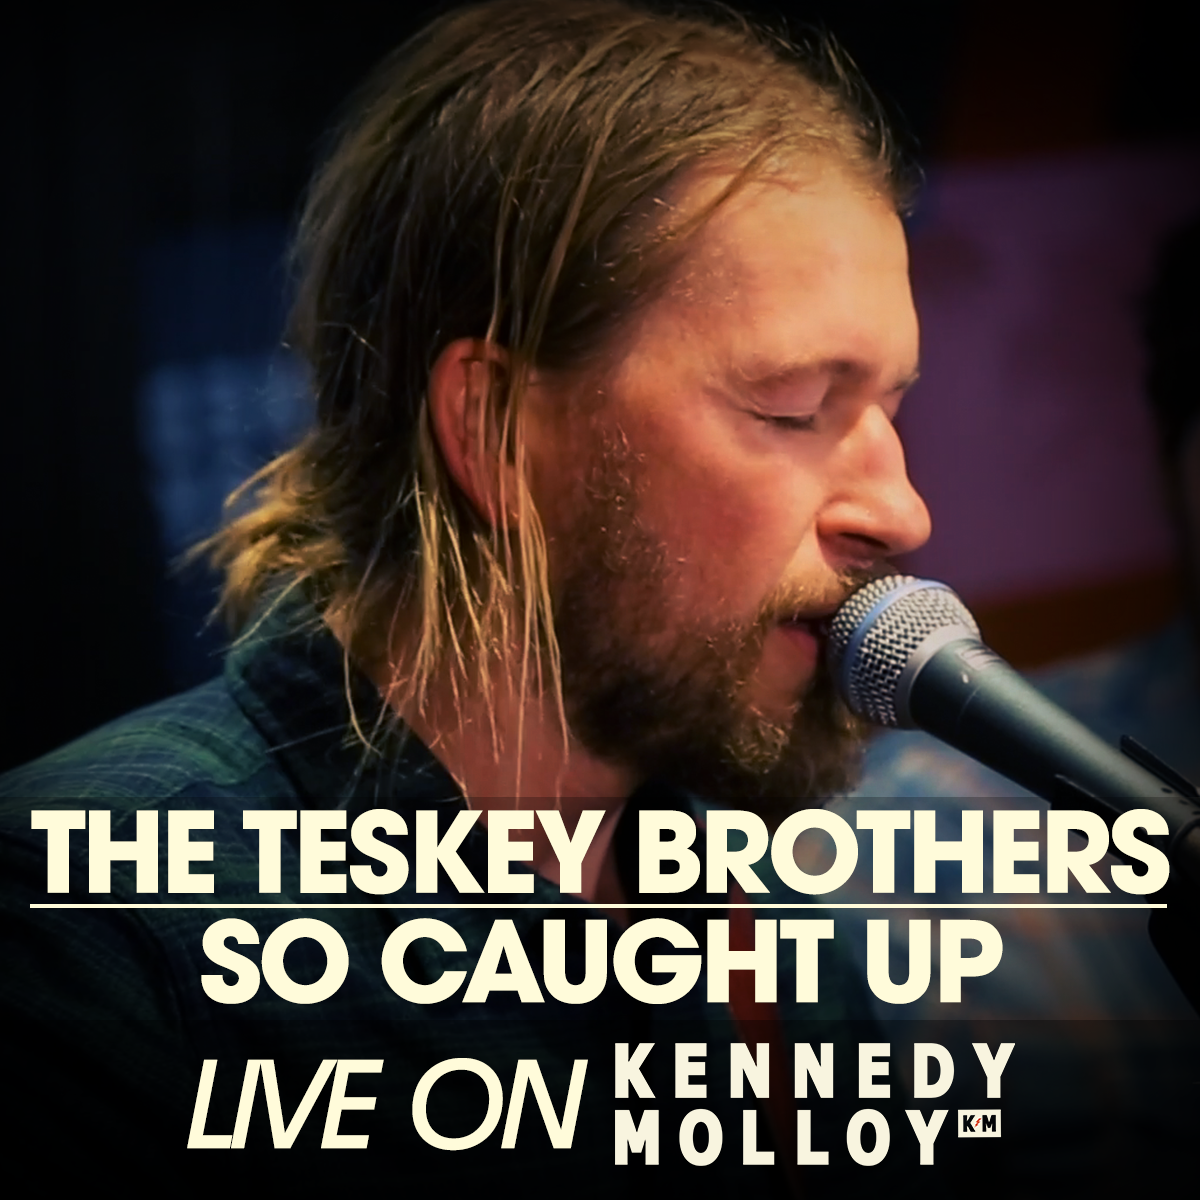 The Teskey Brothers - So Caught Up (Live On Kennedy Molloy!)